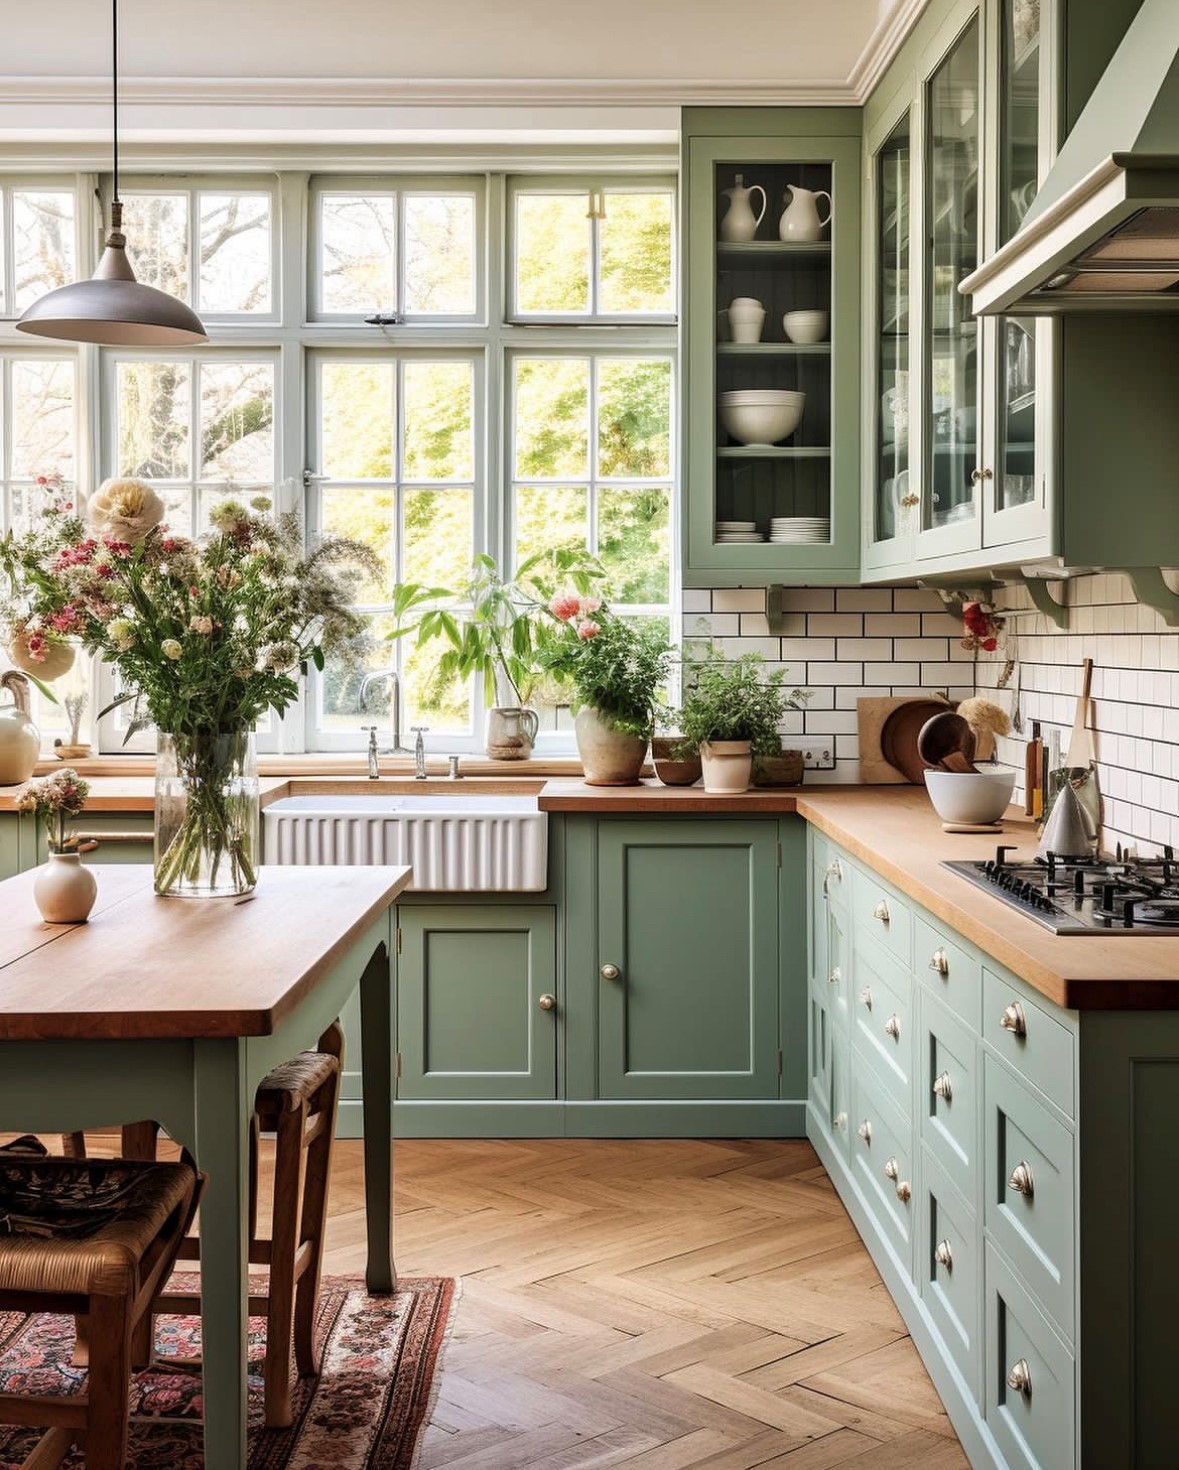 AI Assisted image of a beautiful kitchen. There are large windows with a butler sink in front of them, green units with a wooden worktop and wall units displaying a mixture of white crockery